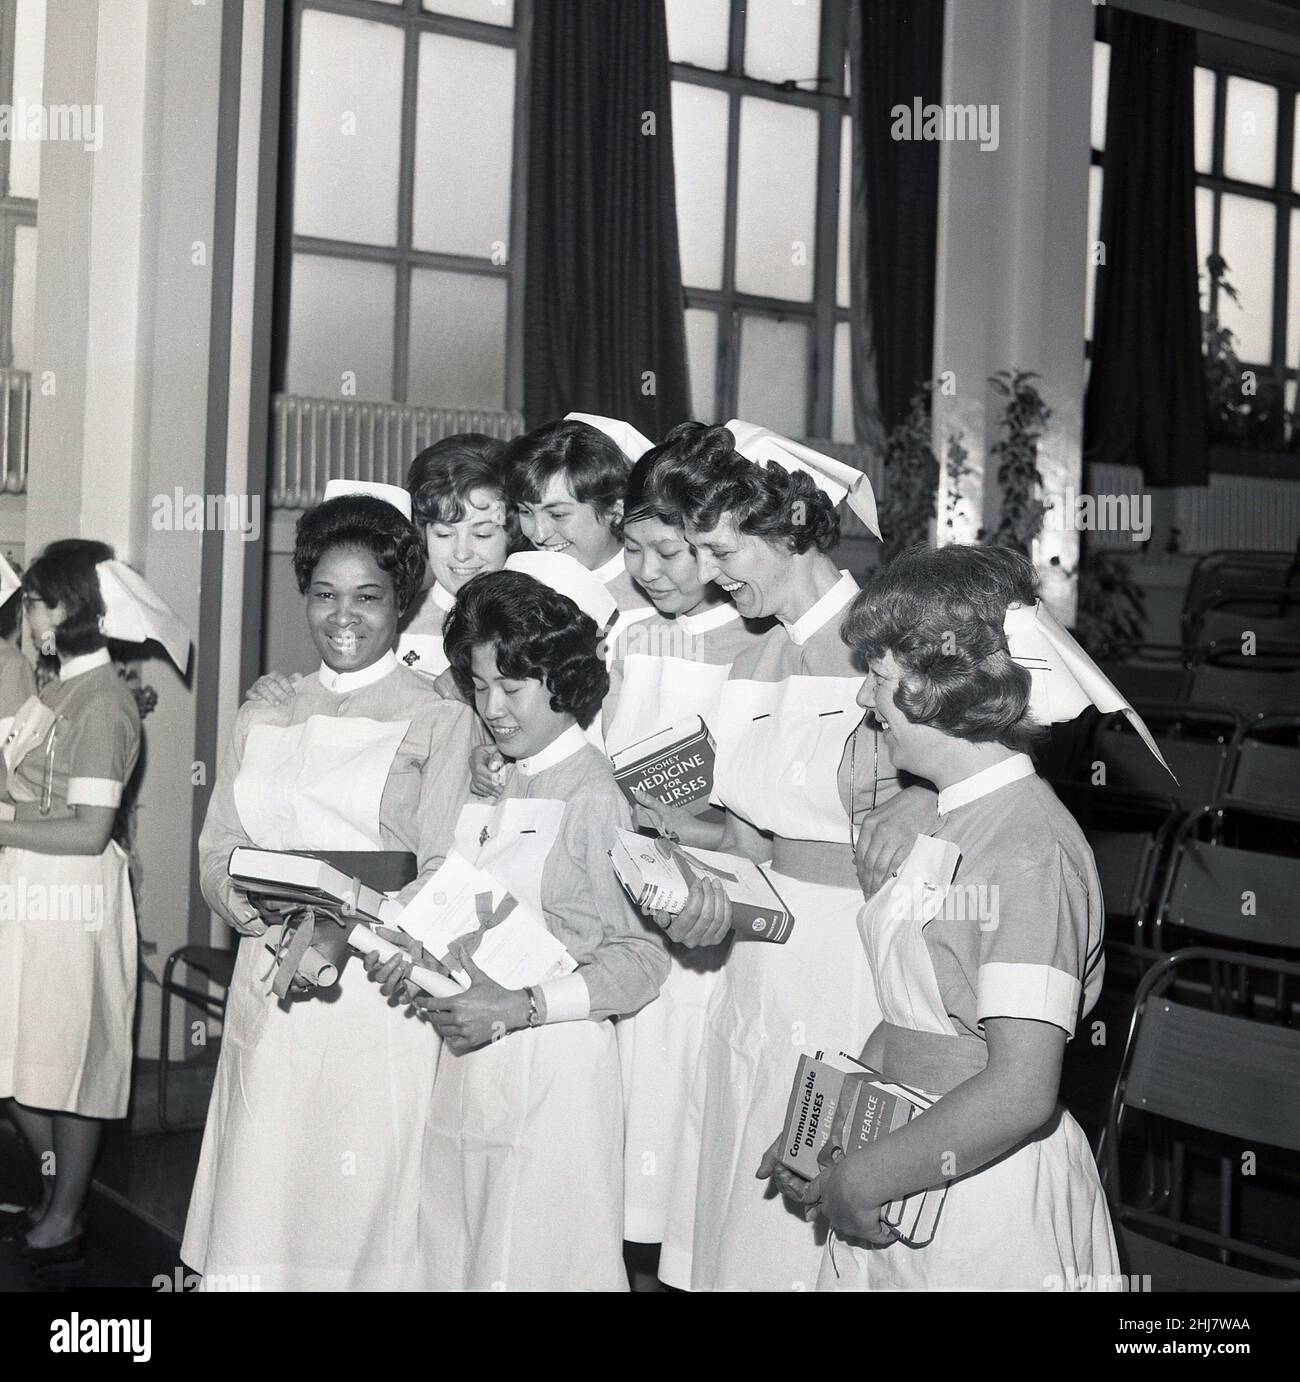 1960s, historical, inside a hall, a group of excited newly qualified female nurses, some holding their scrolls and medical books, Lewisham, Southeast London, England, UK. Several are holding, Medicine for Nurses by M. Toohey, a classic medical book of the 1950s and 60s, which was still be printed in the 1990s. Stock Photo